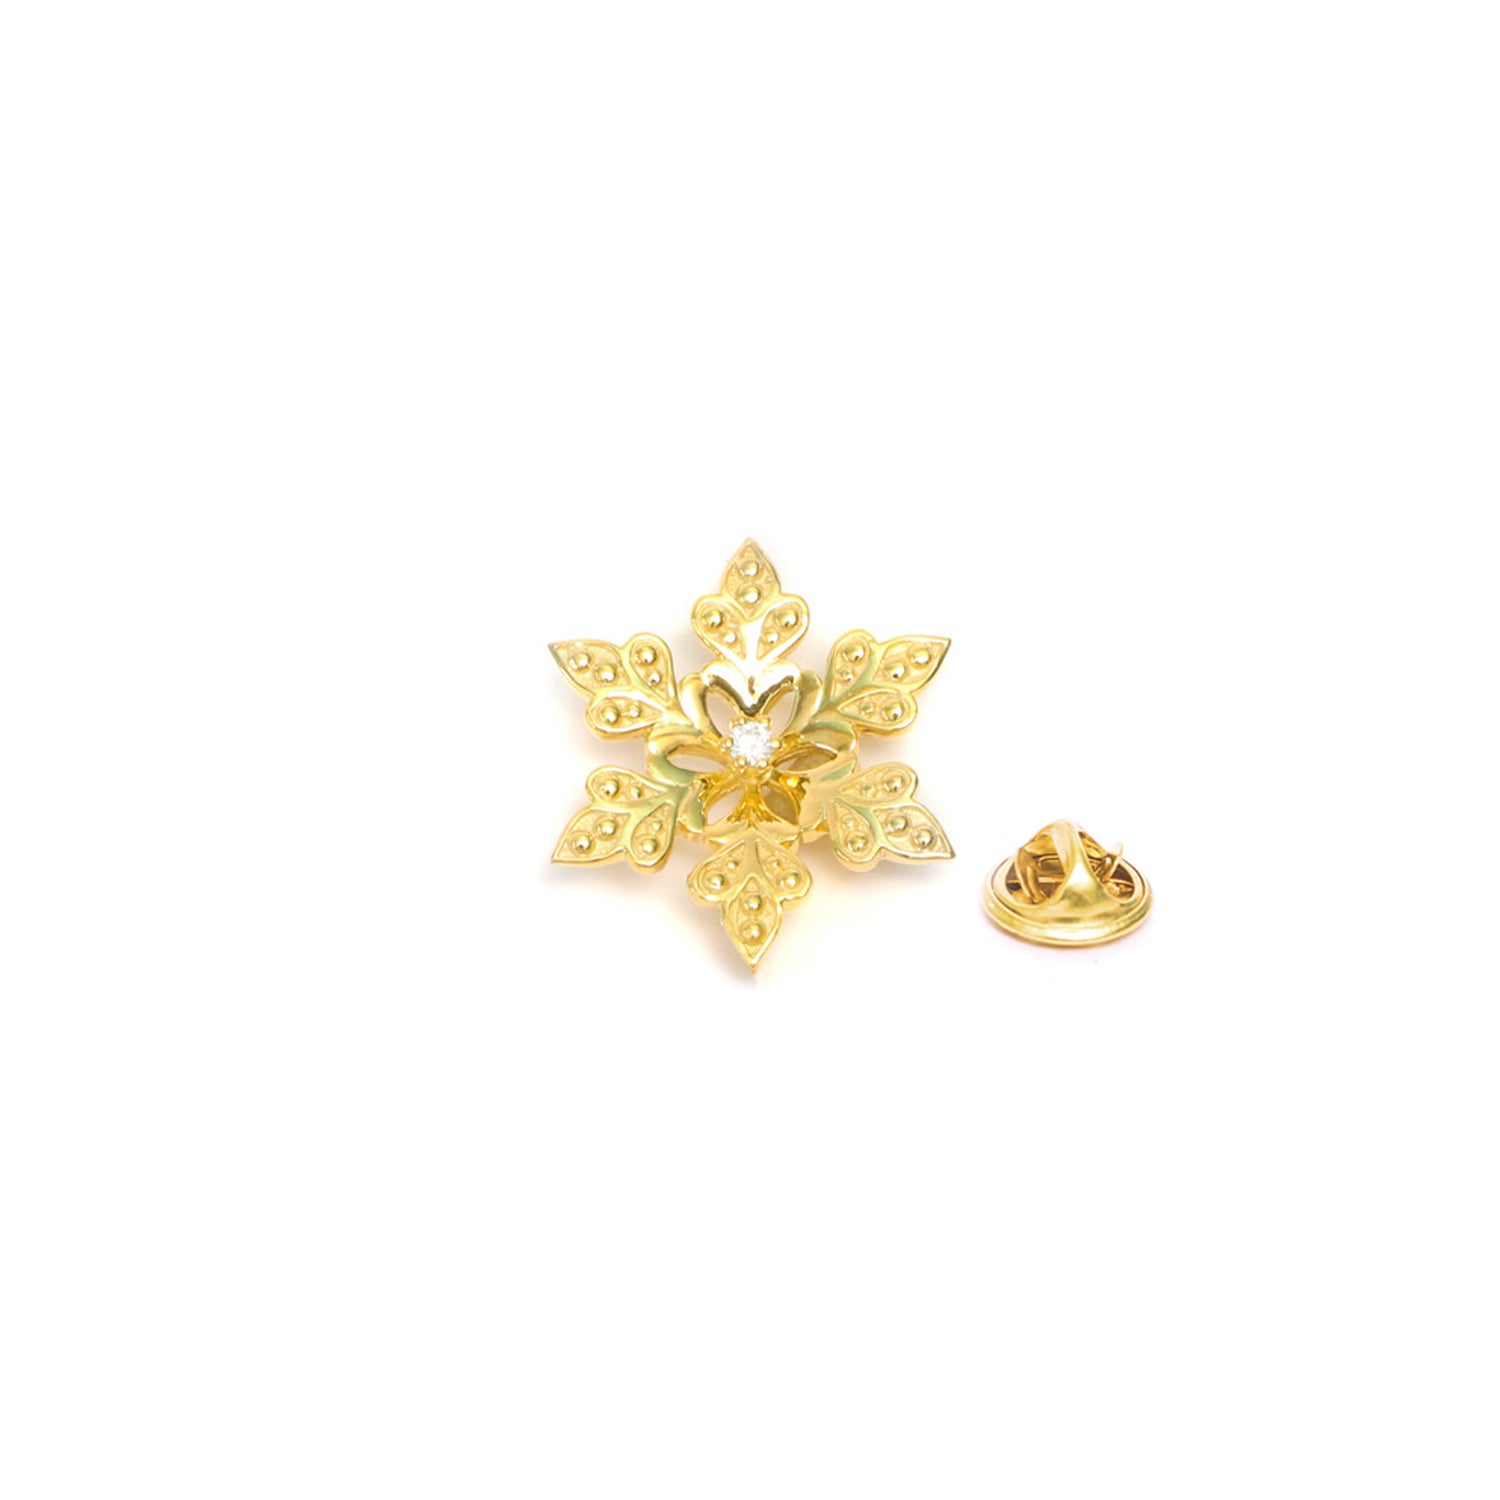 Snowflake Lapel Pin with Butterfly Pin